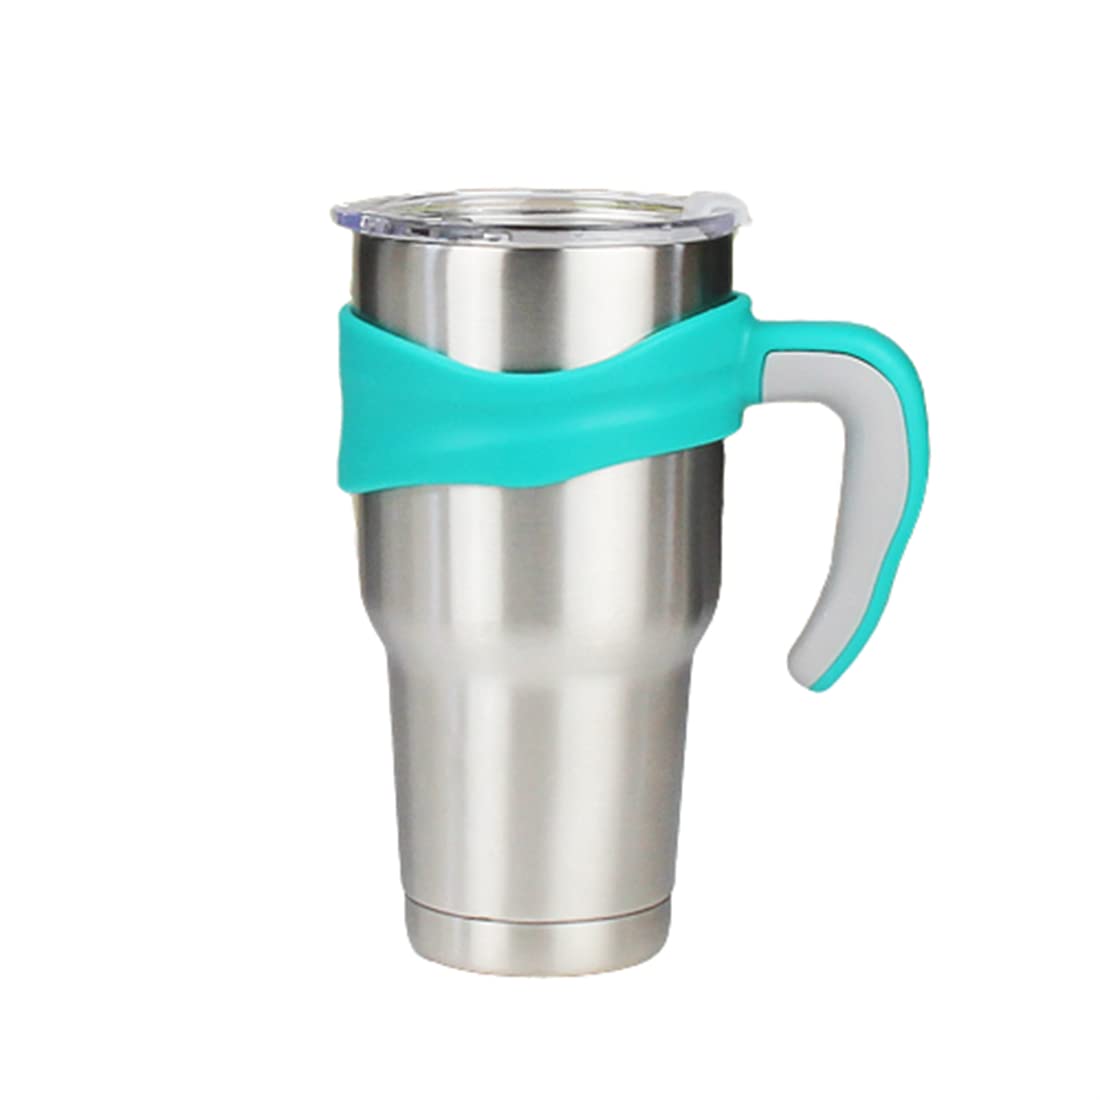 30 oz Tumbler Handle, Anti Slip Travel Mug Grip Cup Holder for Stainless Steel Tumblers, Suitable for Trail, Sic, Yeti, Rtic, Ozark and More 30 Ounce Tumbler Mugs (Turquoise)